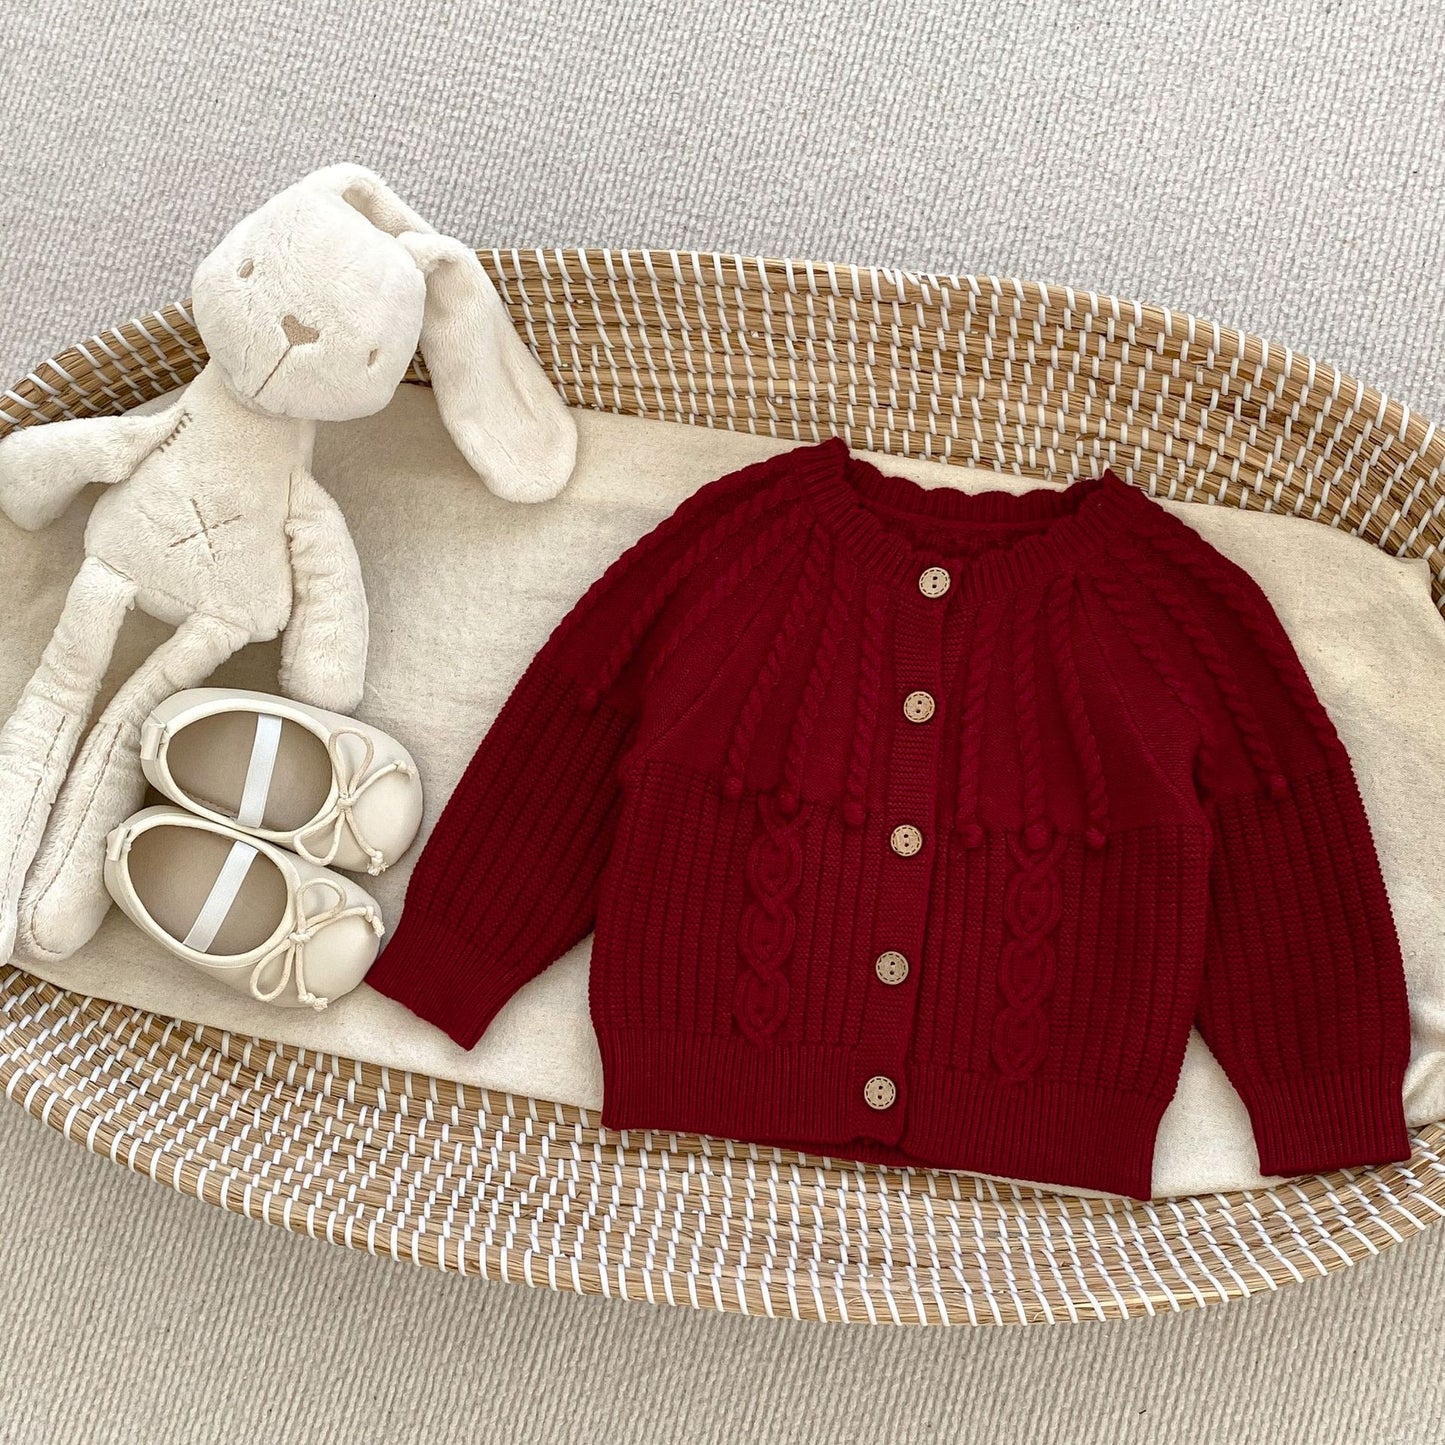 Handmade Knitted Cardigan With Onesies Sets